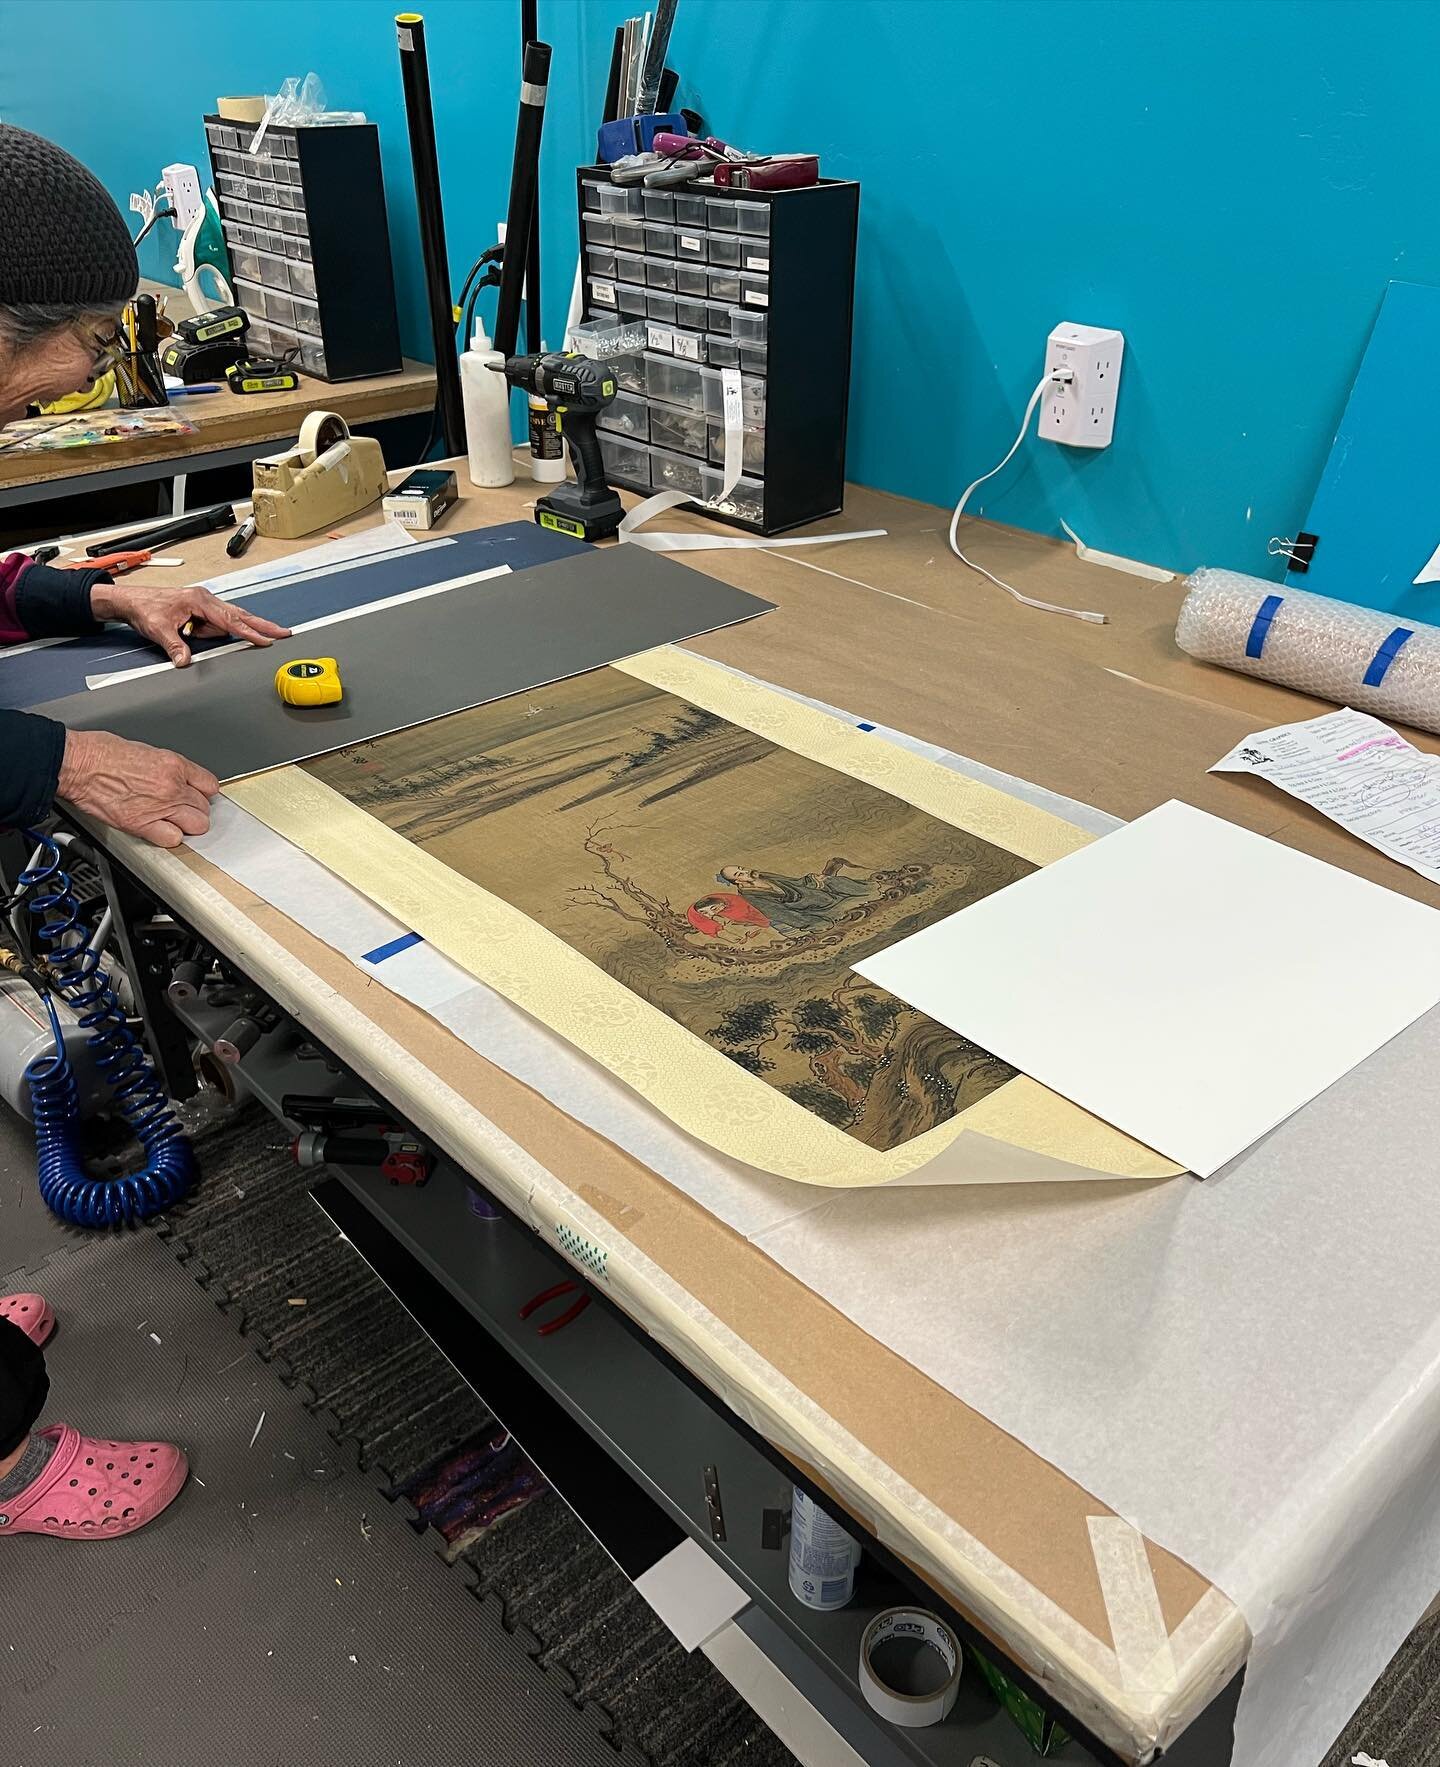 Always framing! Check out our latest reel to see the big reveal! 🖼️ 
&bull;&bull;
&bull;&bull;&bull;
&bull;&bull;
#aztecgraphics #pacificbeach #pacificbeachbusiness #posters #prints #art #sandiego #framing #customframing #sandiegoart #sandiegophotog